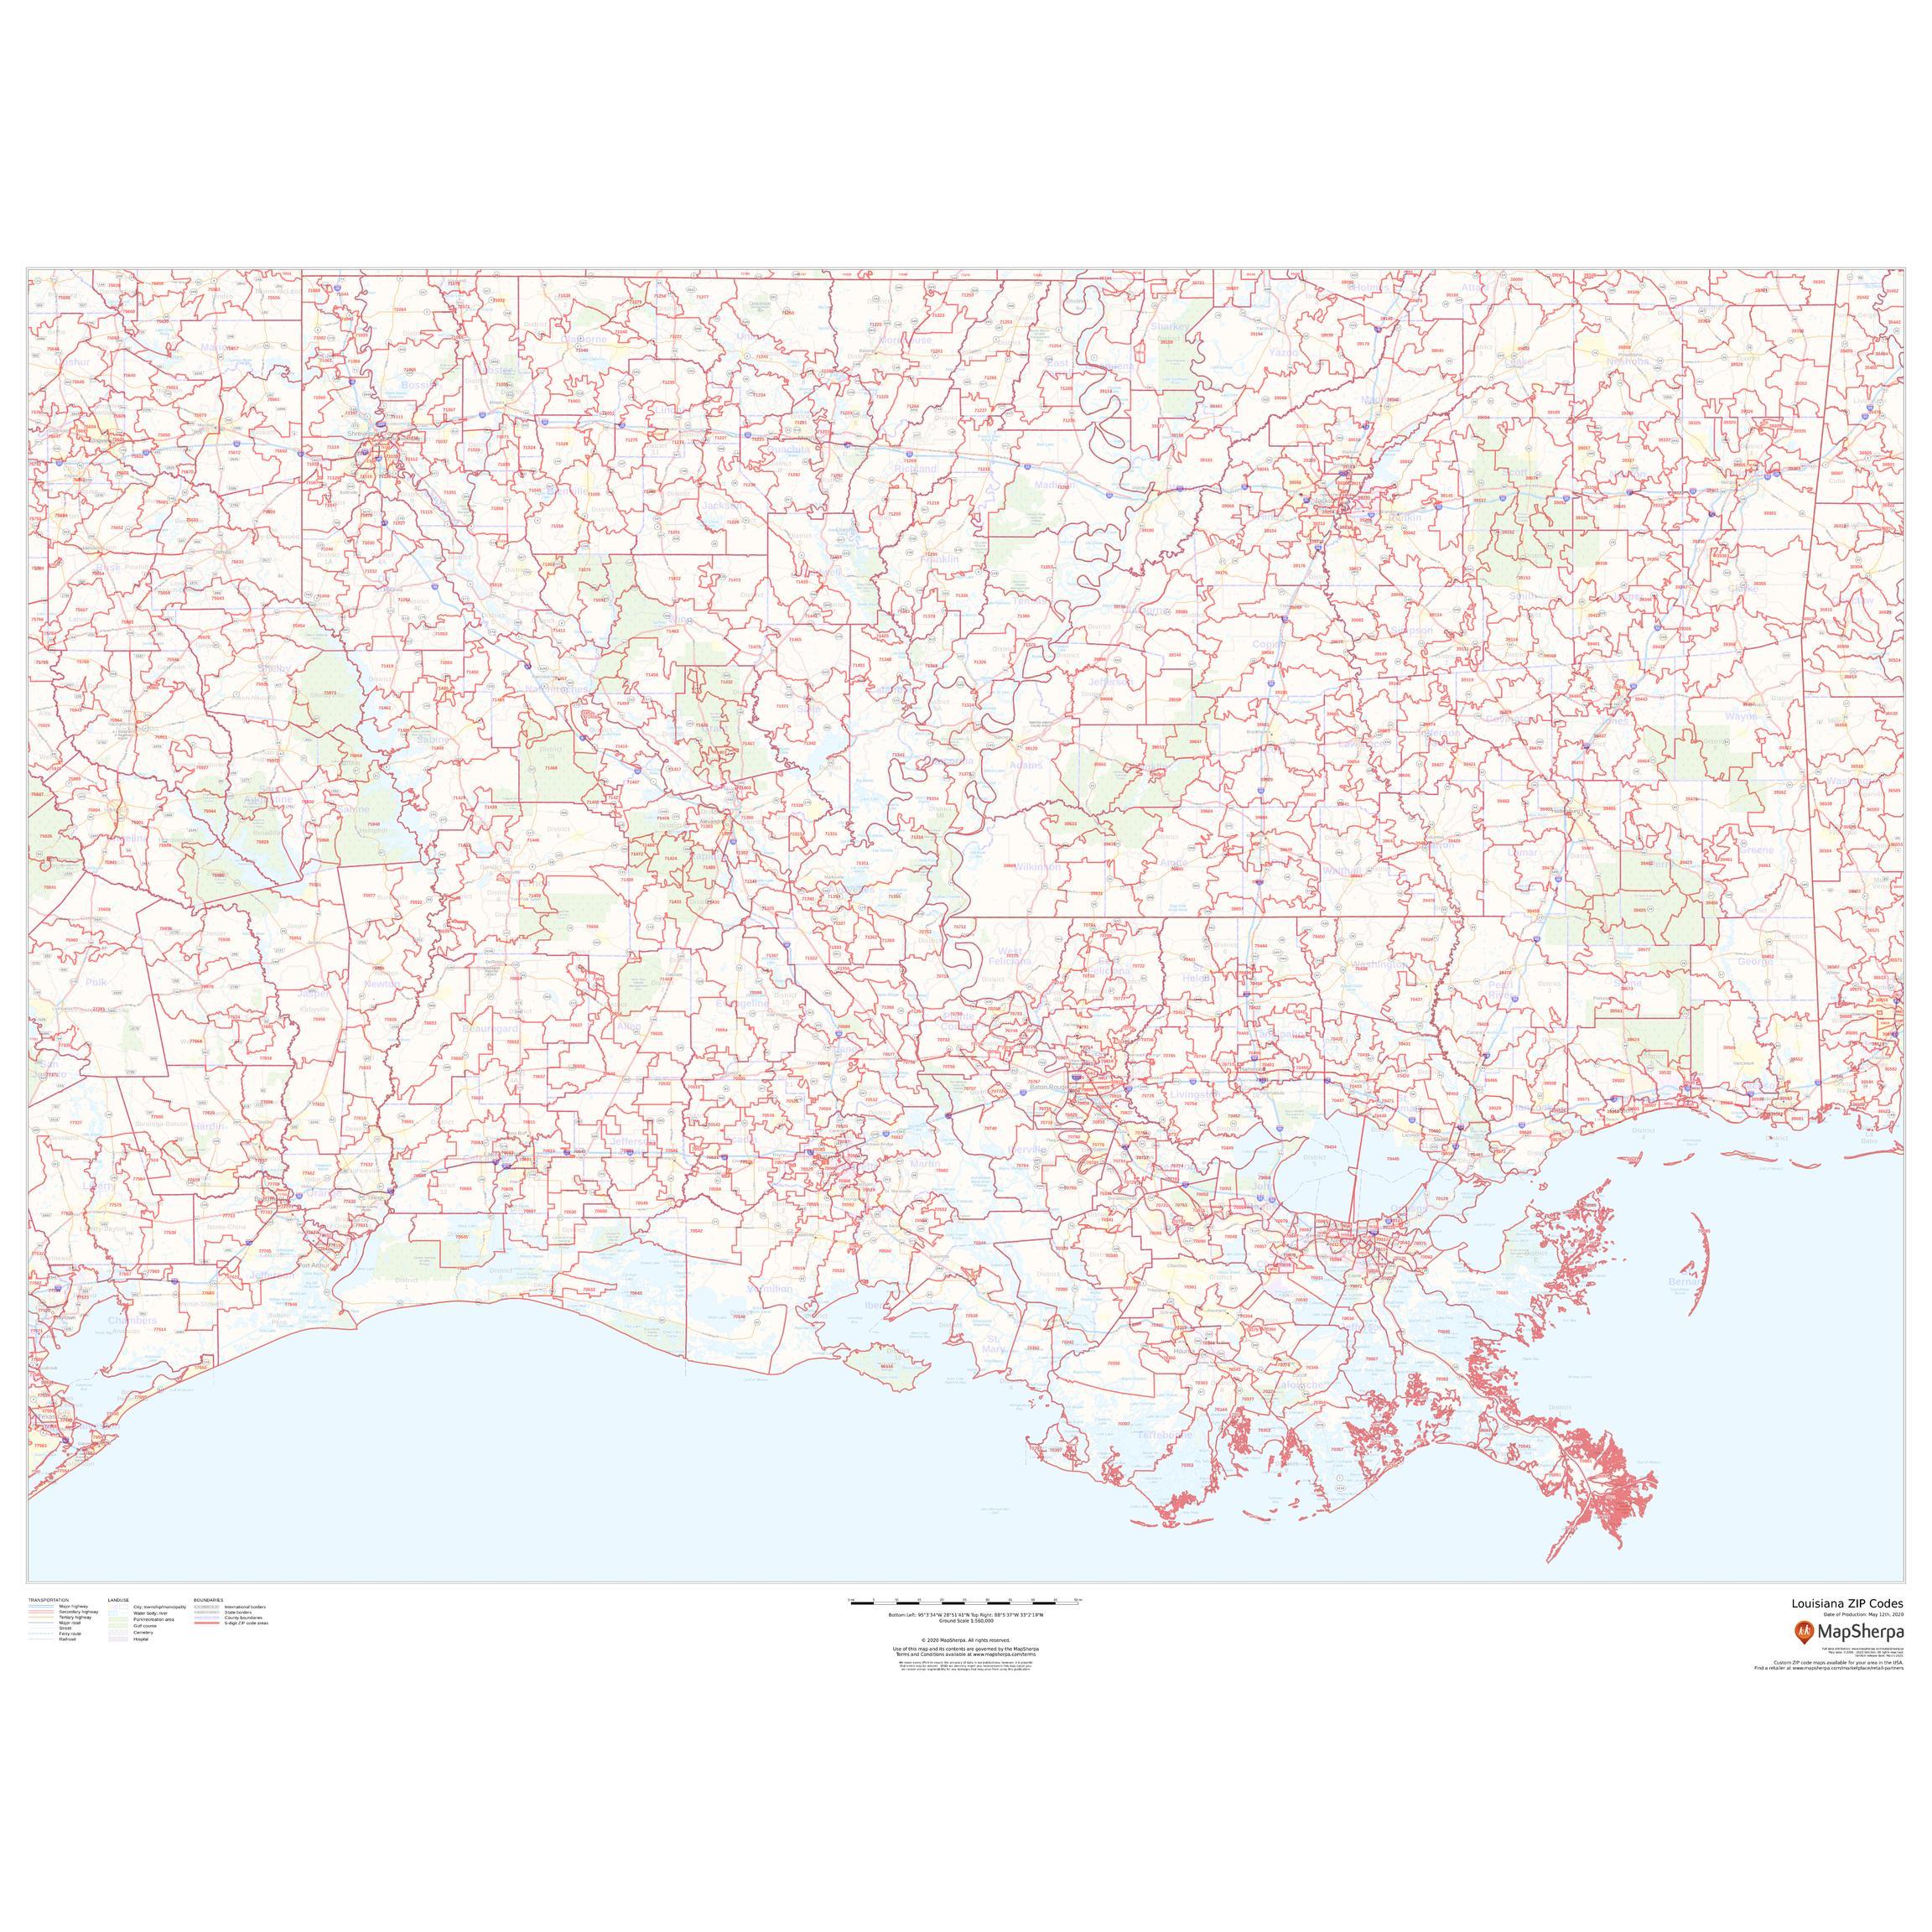 Louisiana ZIP Code Map with Counties by MapSherpa - The Map Shop